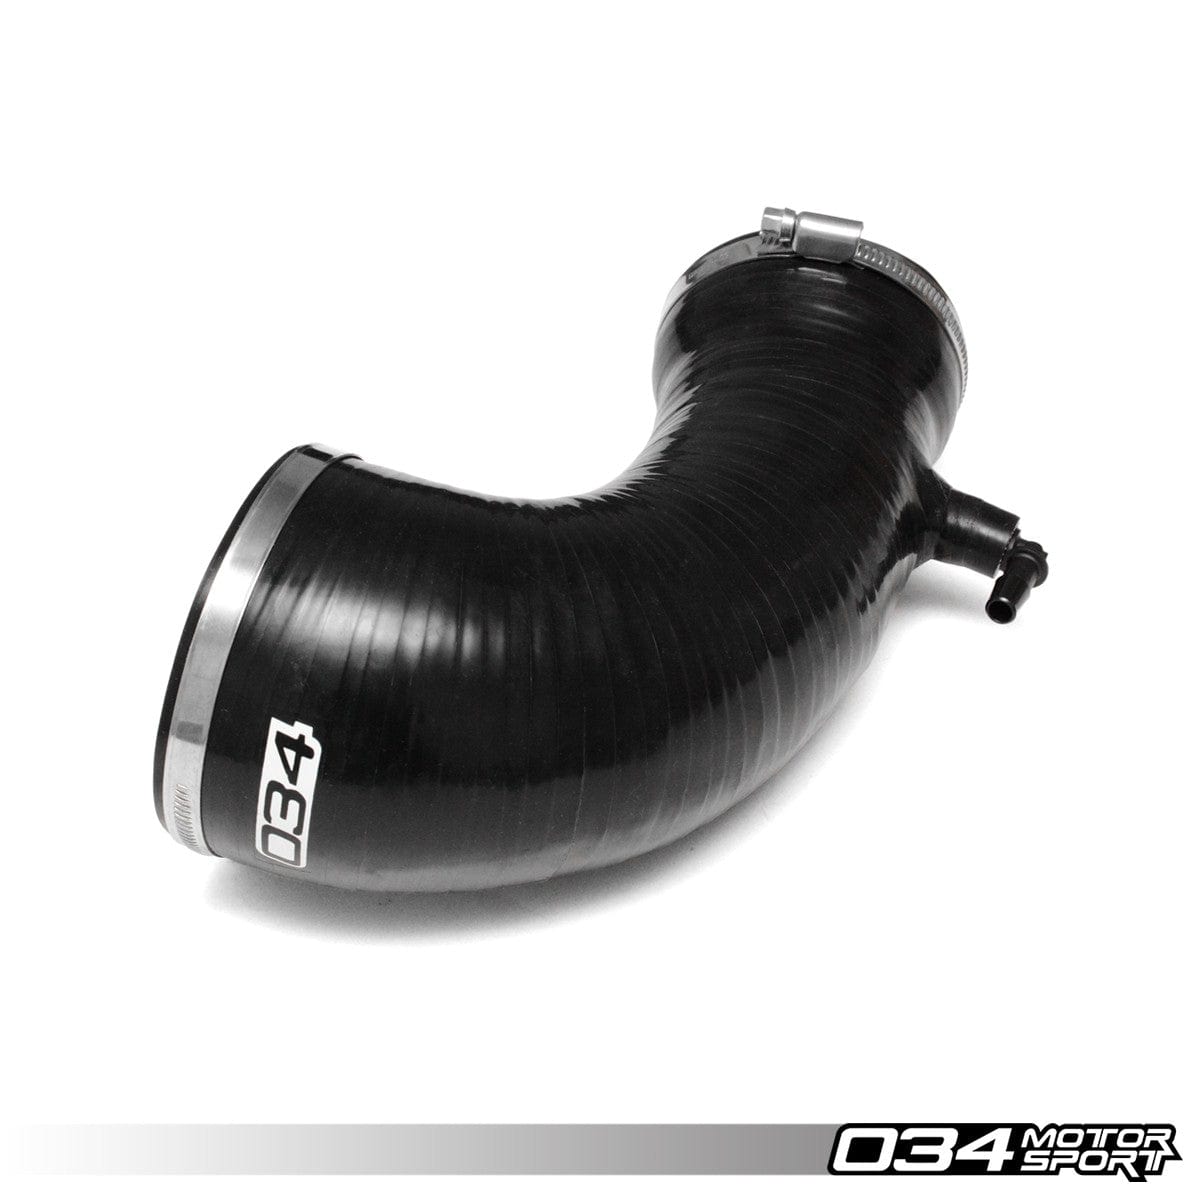 034Motorsport Audi Turbo Inlet Hose, High Flow Silicone, B9 A4/A5 & ALLROAD 2.0 TFSI ML Performance UK